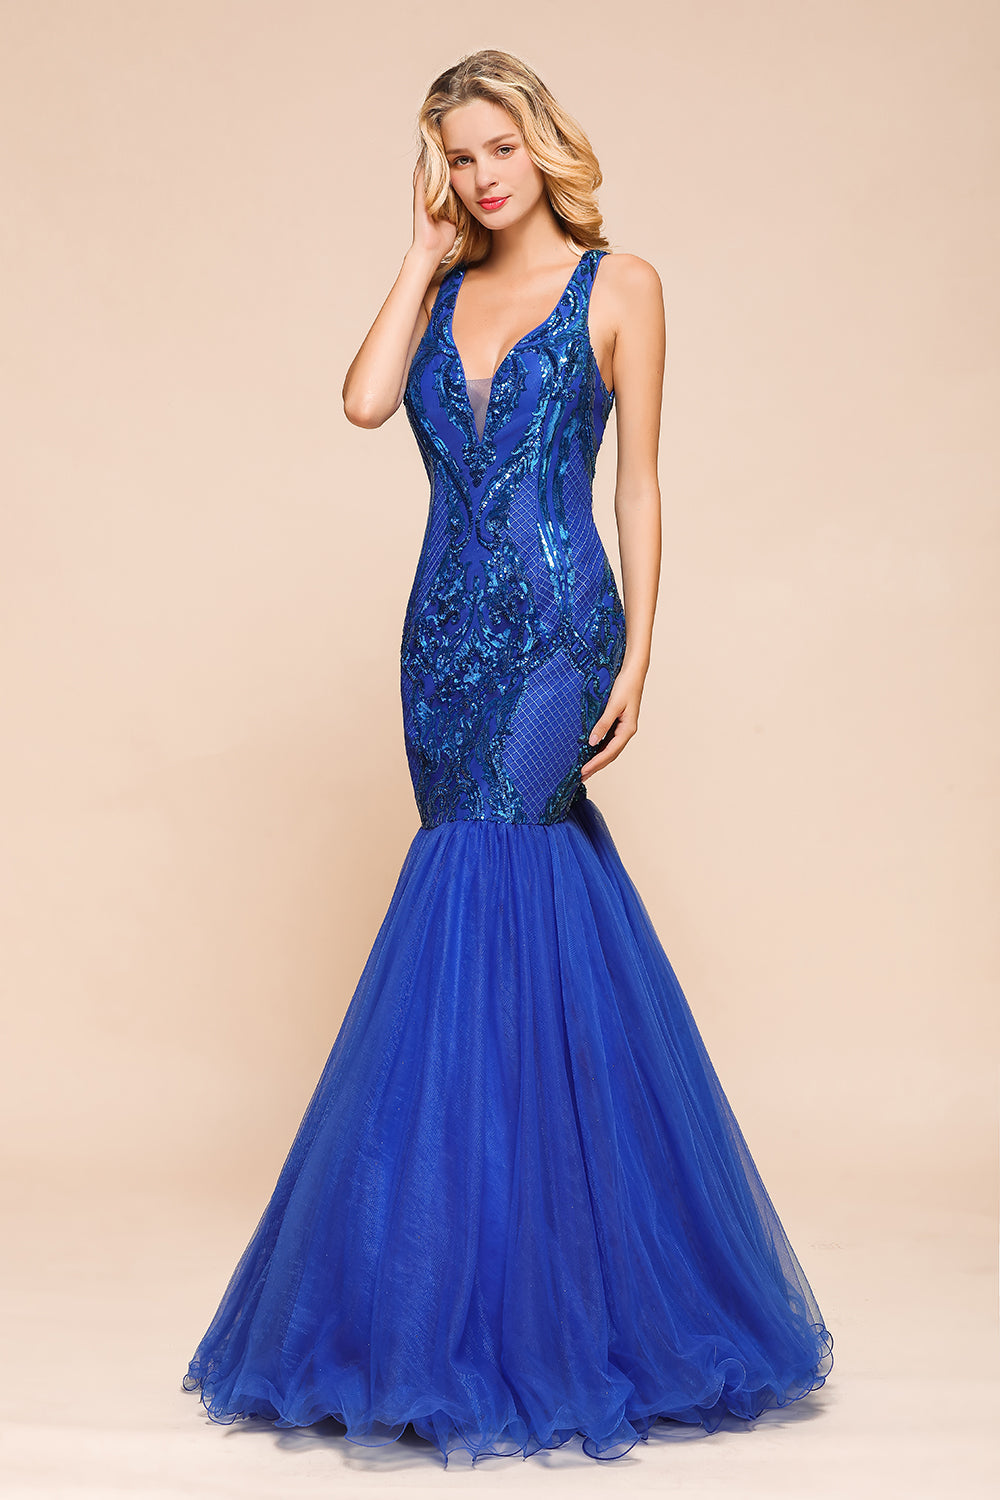 Gorgeous Royal Blue Mermaid Prom Dress | Long Sequins Evening Party Gowns